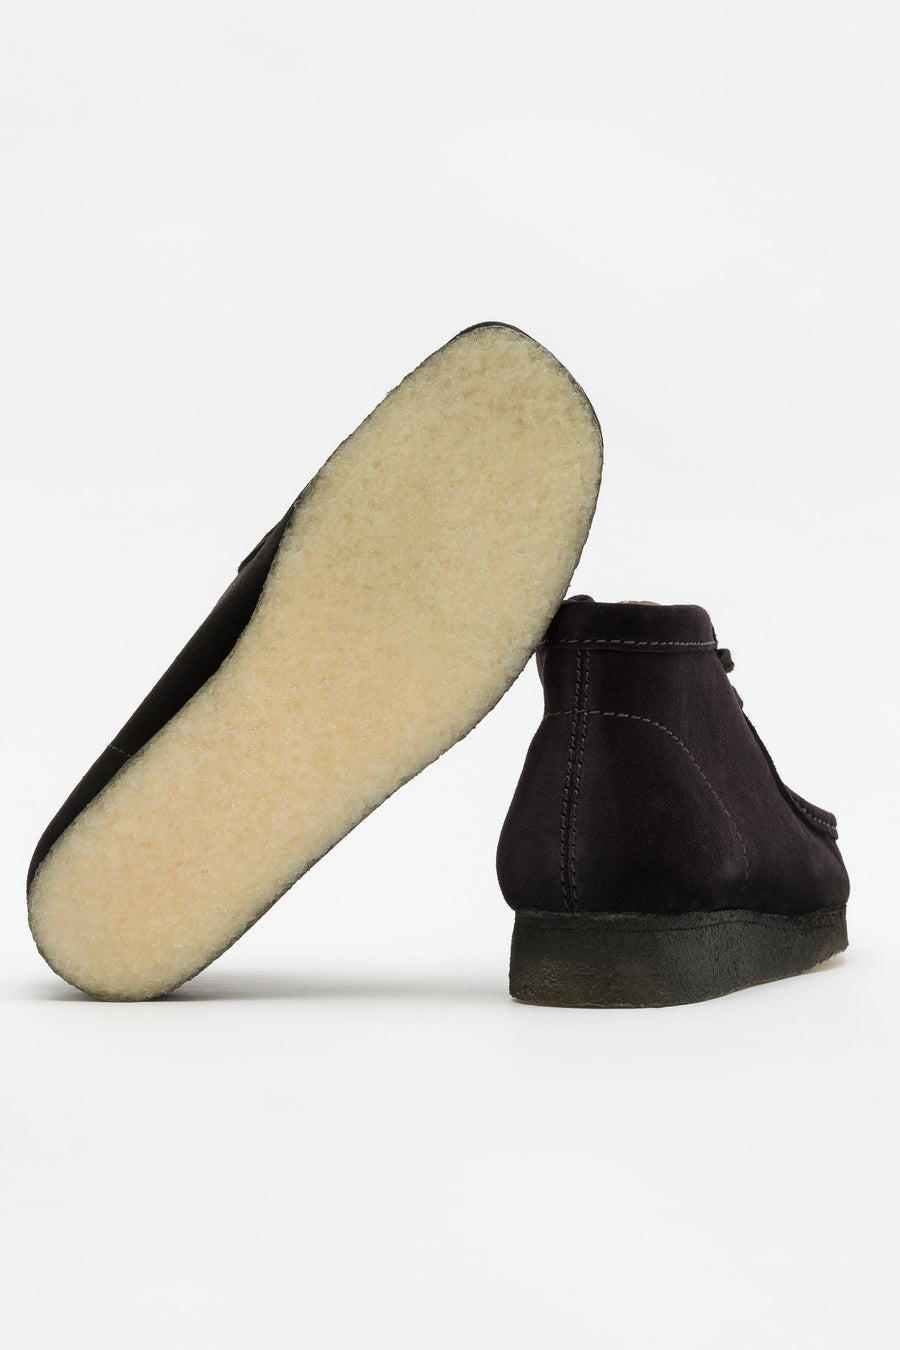 clarks wallabees size 8